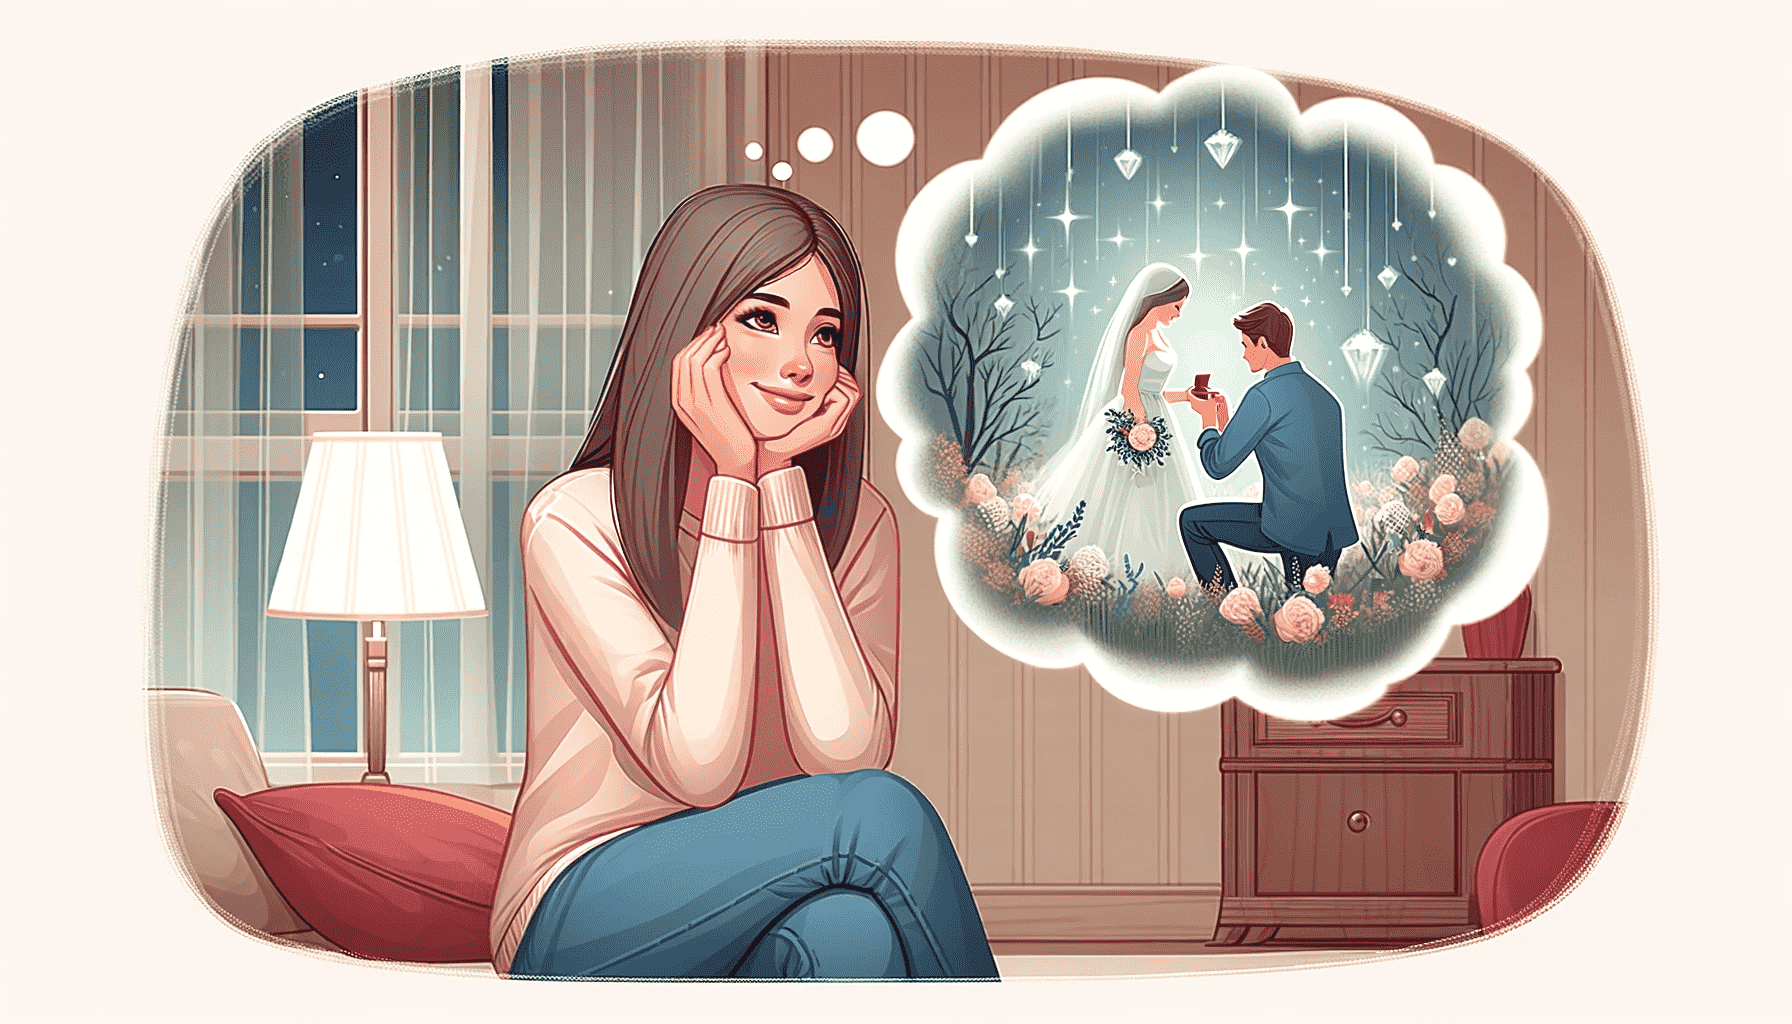 woman fantasizing about her boyfriend proposing to her